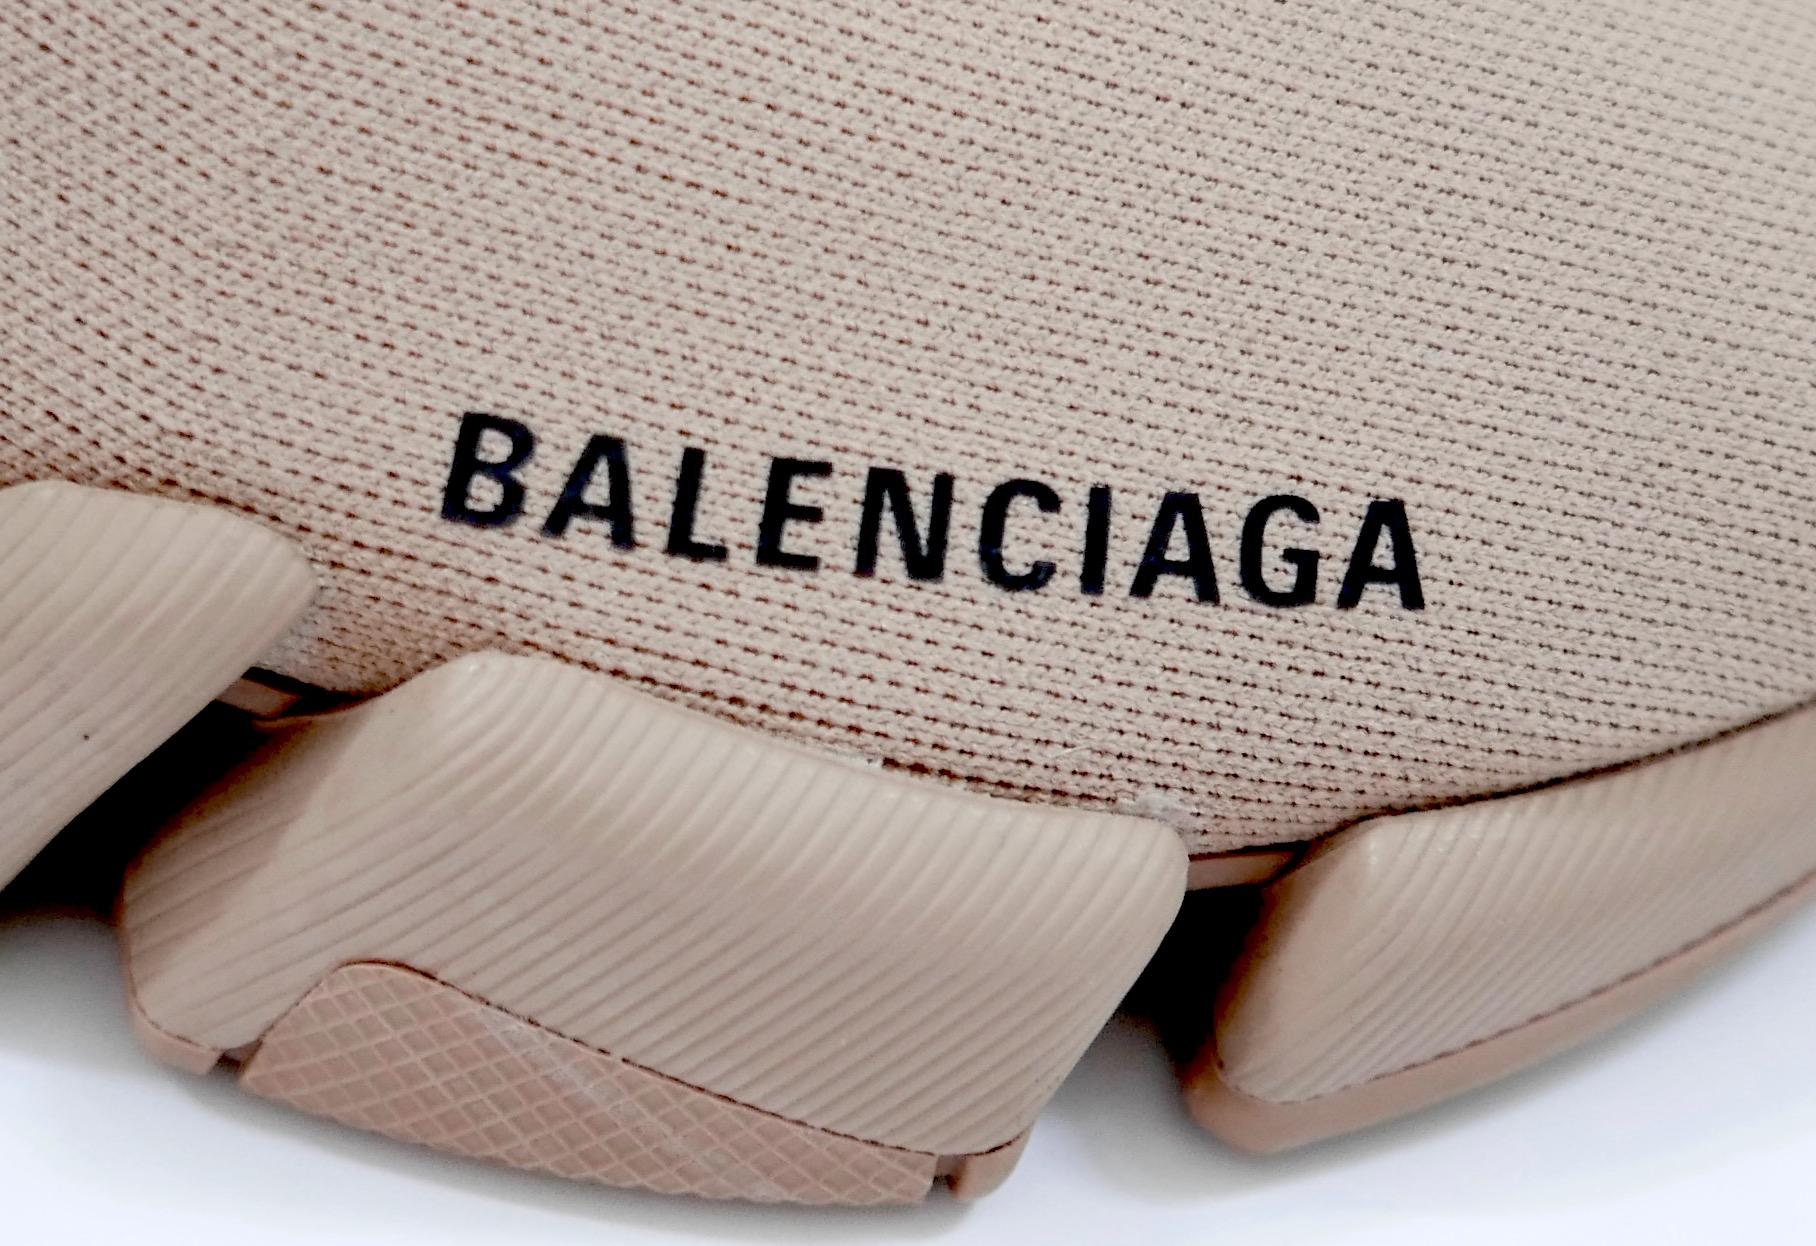 Balenciaga Speed 2.0 Knit Sock Sneakers In Excellent Condition For Sale In London, GB